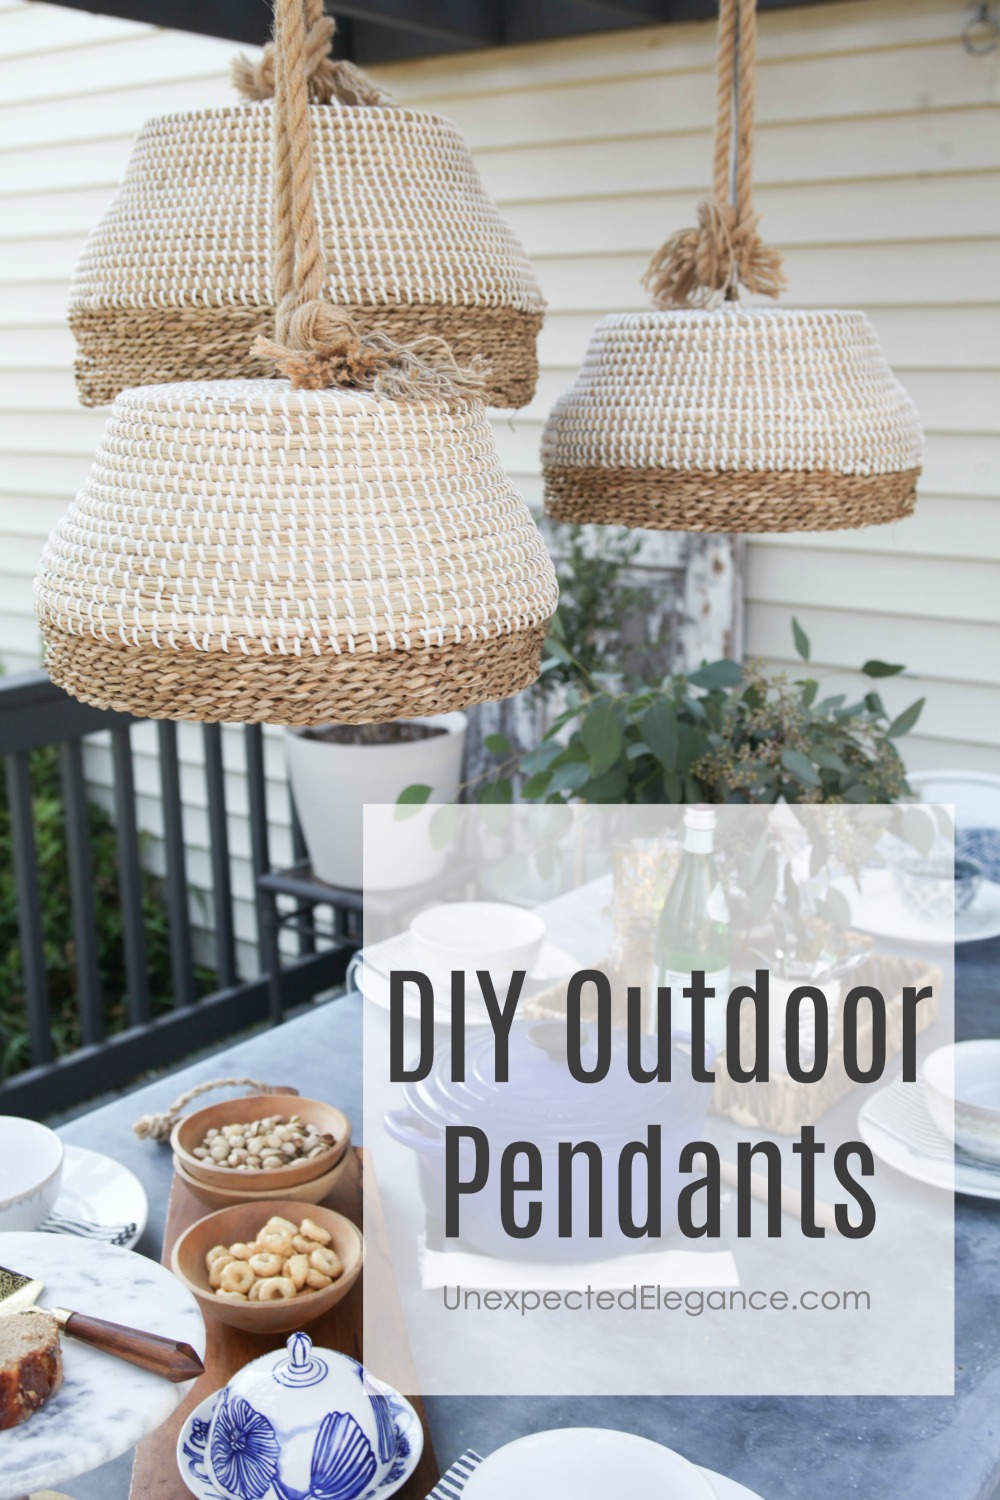 This DIY Outdoor Pendant Light tutorial is a great way to brighten your space and spend more time on the deck in the evenings!